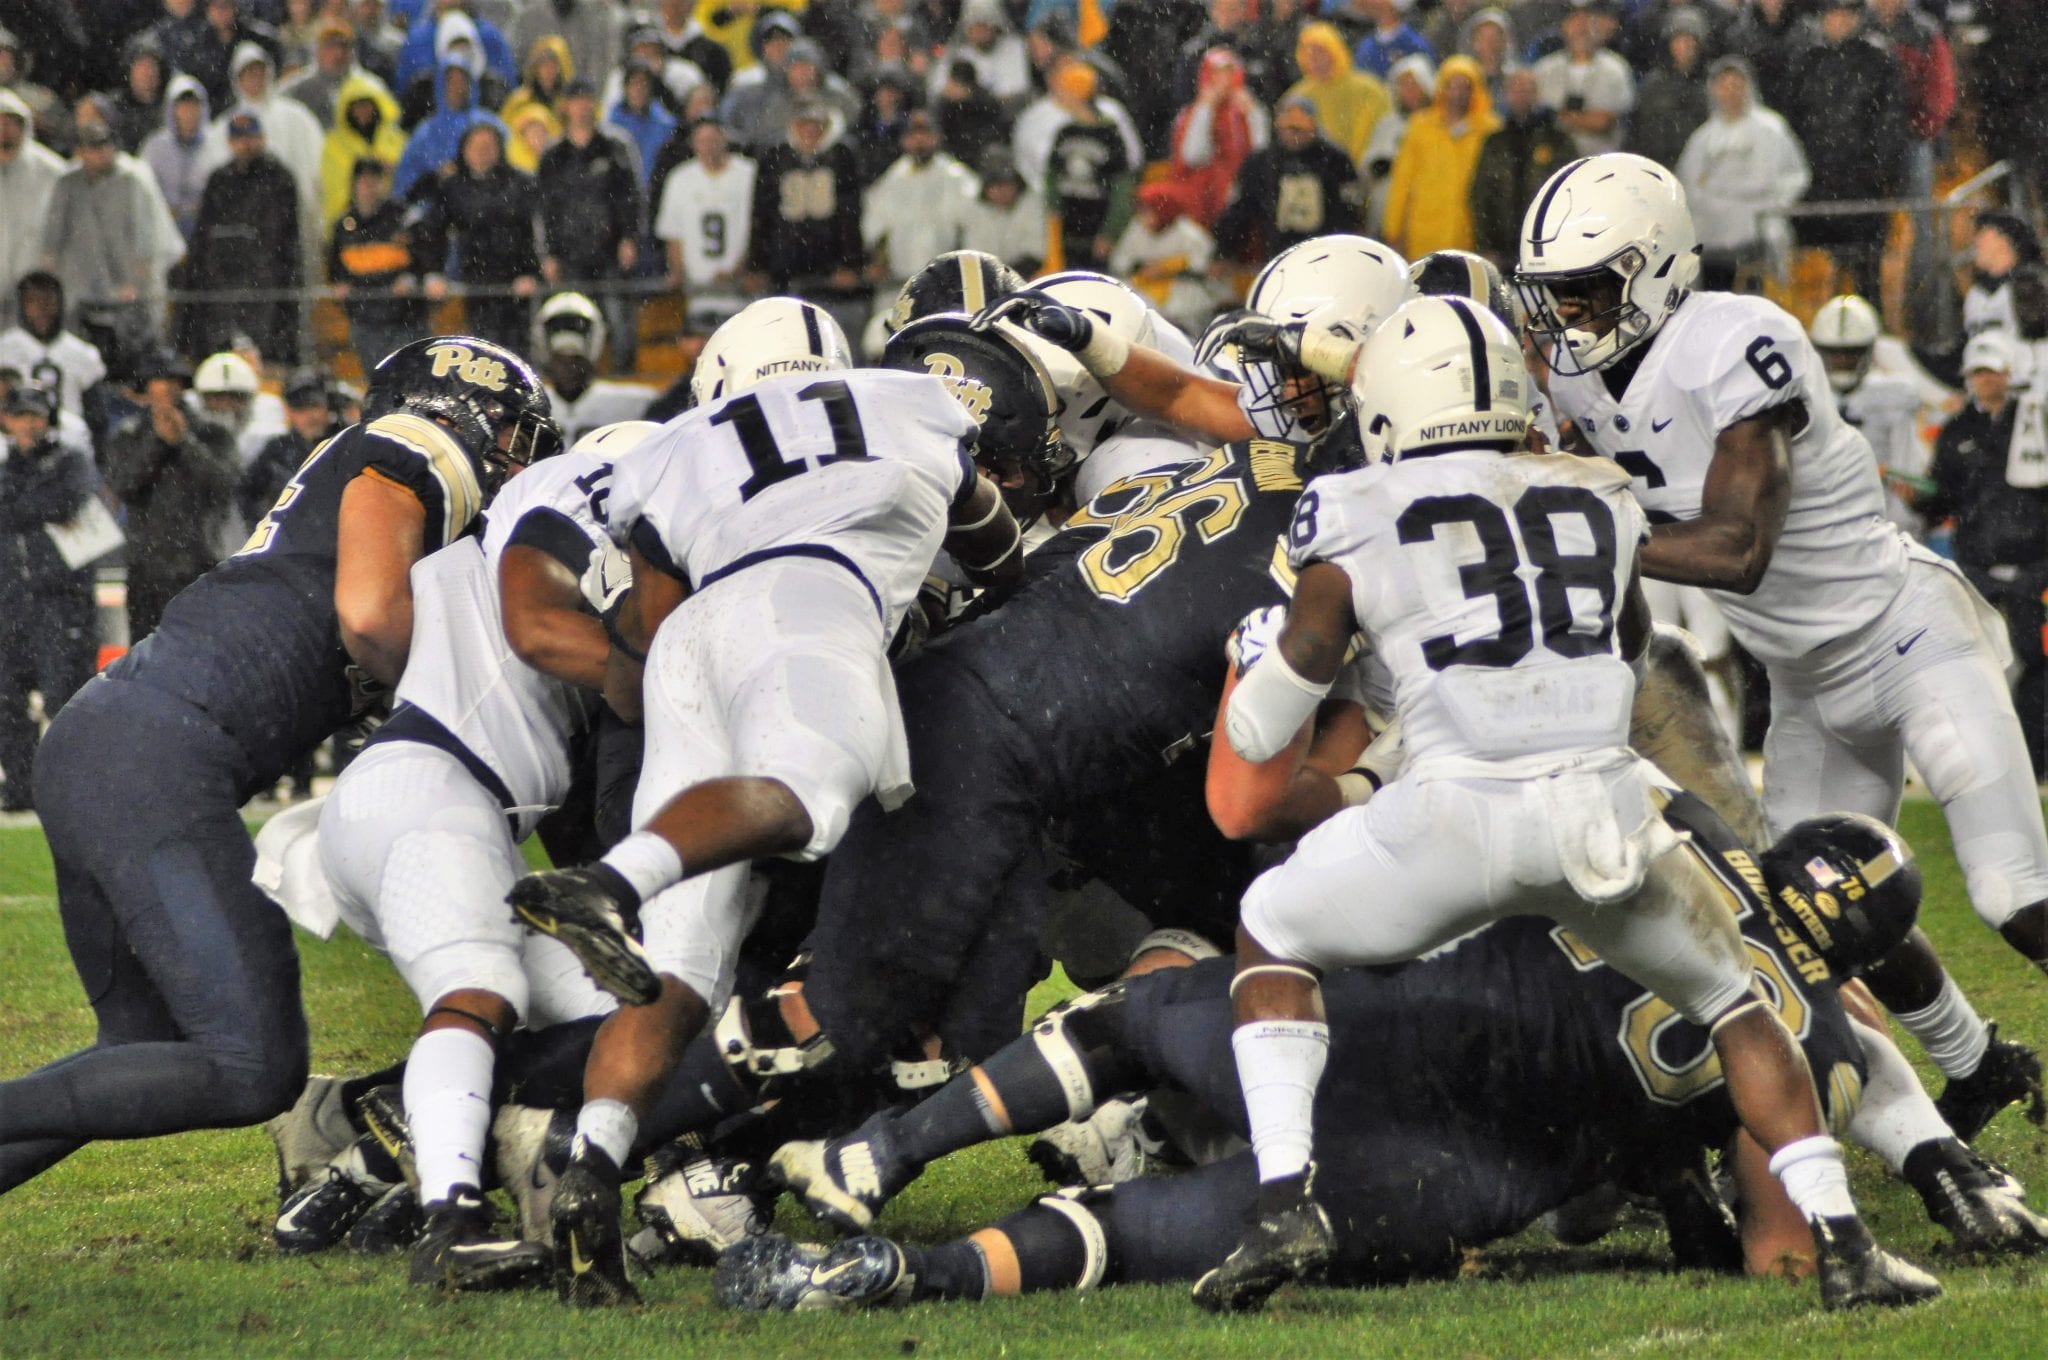 Trying to move the pile versus Penn State. -- MIKE SMETANA